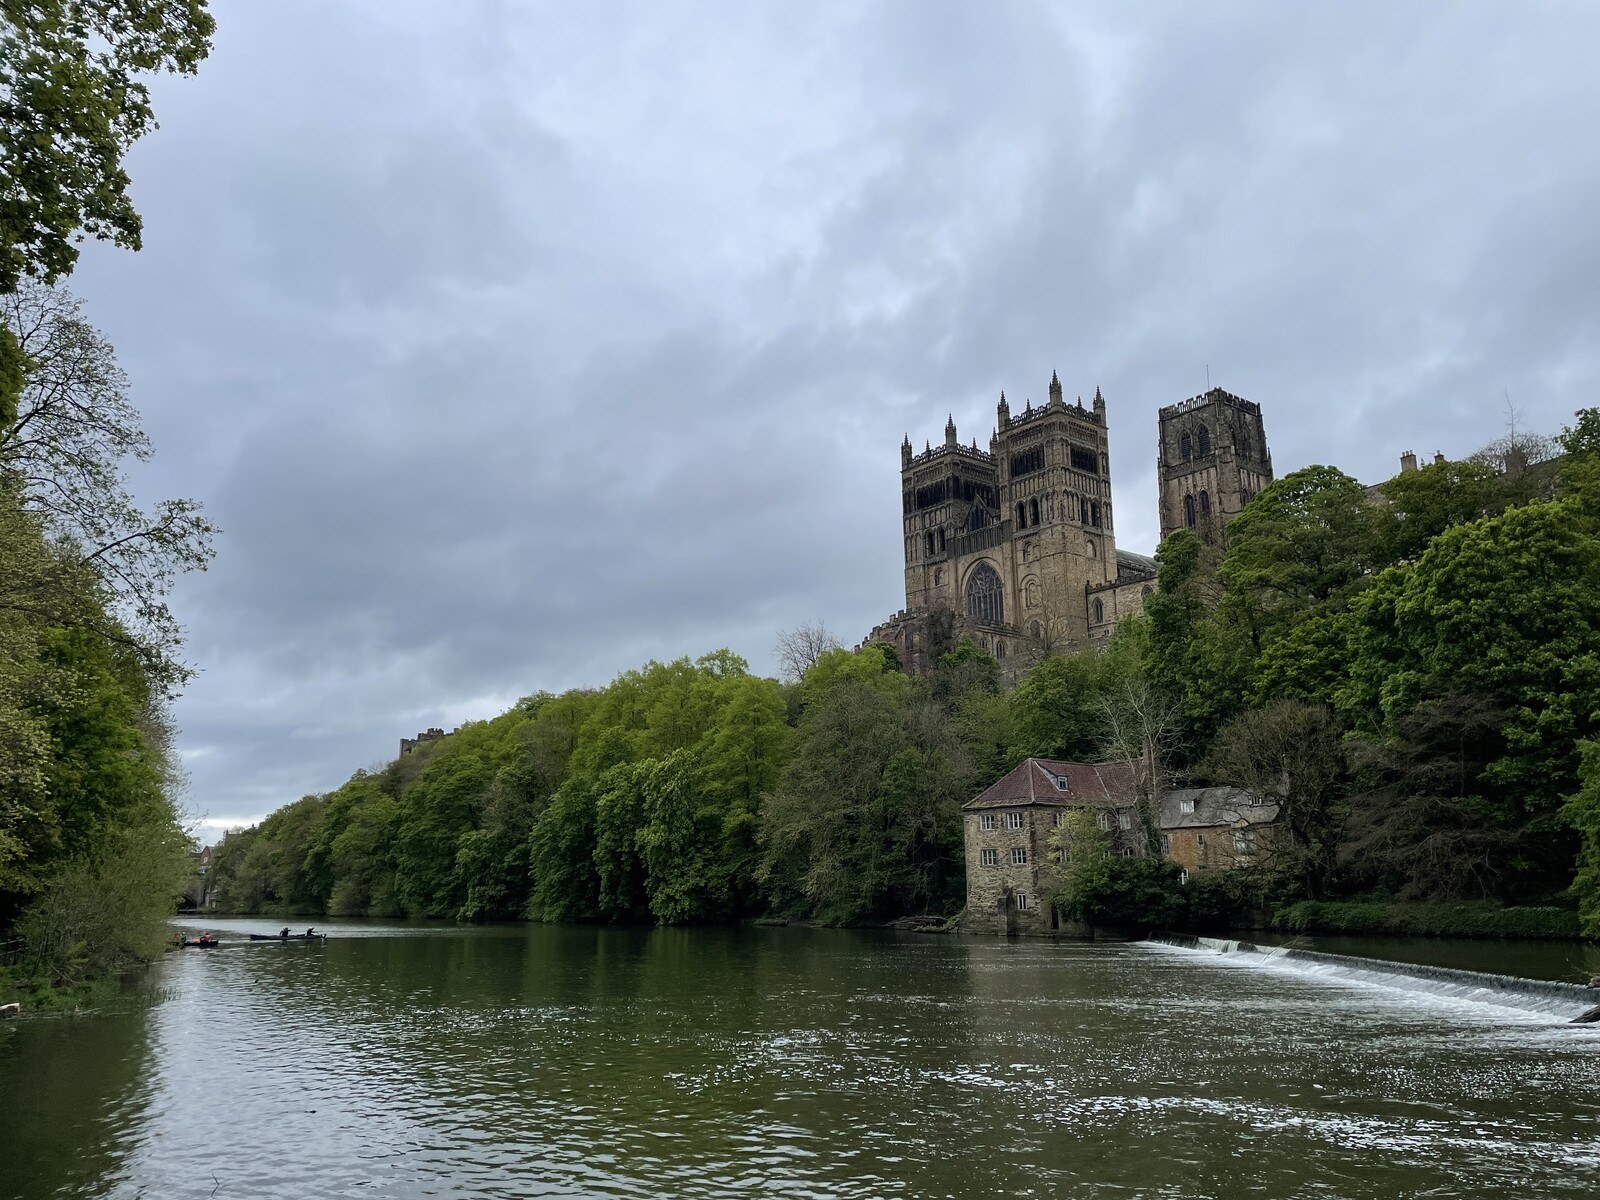 Durham Cathedral rising above the trees on the banks of the River Wear, with the old Fulling Mill in the foreground